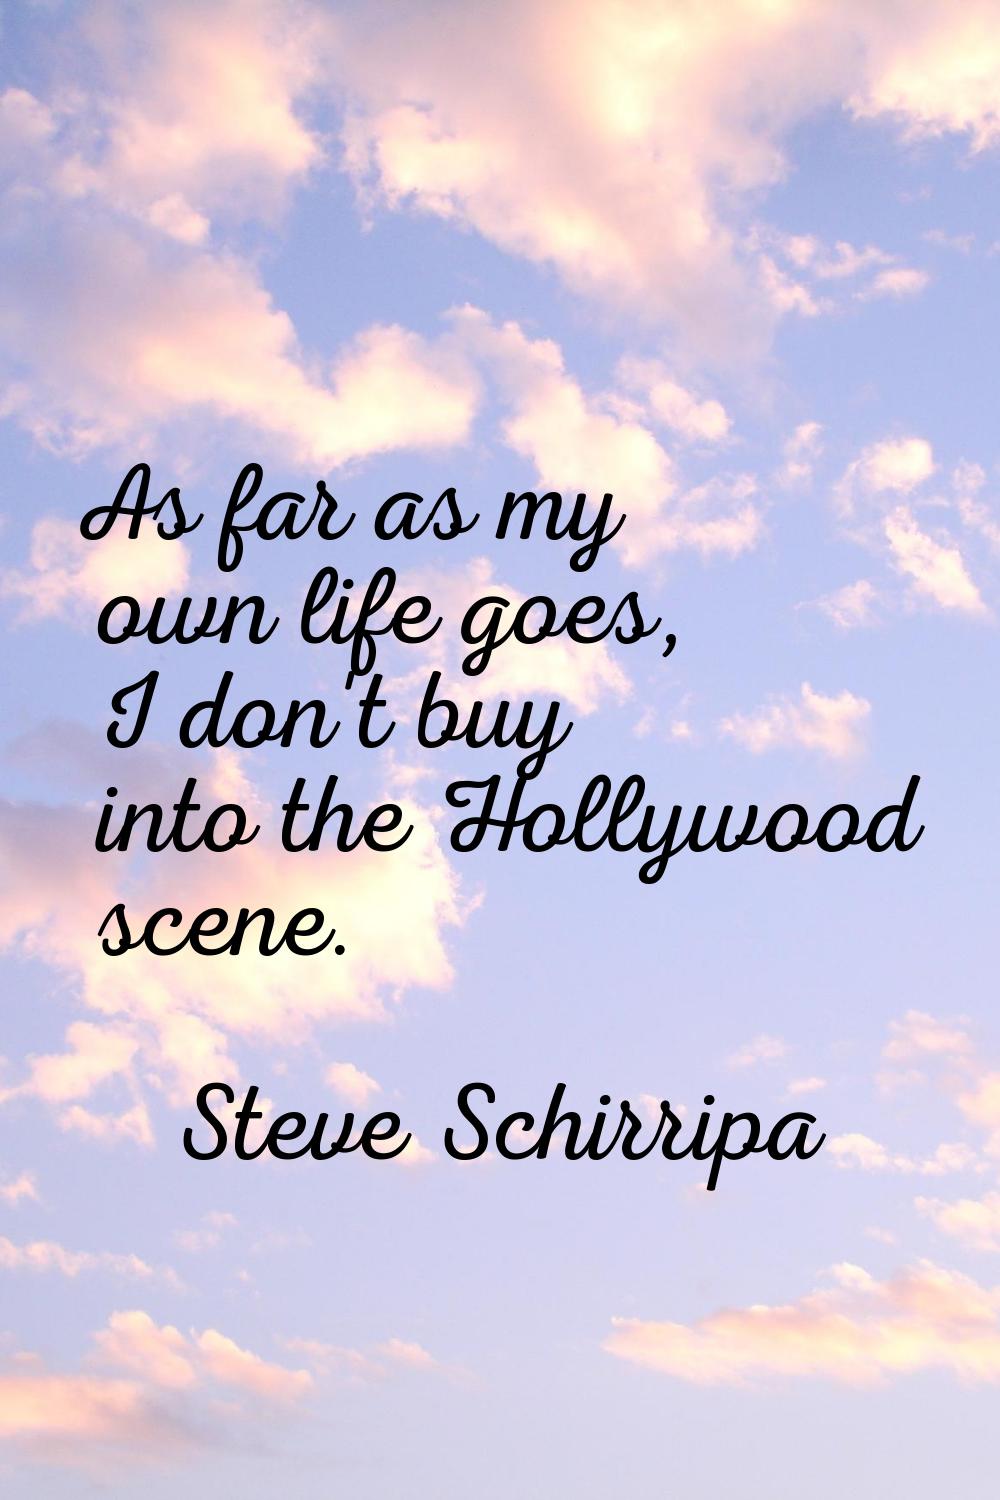 As far as my own life goes, I don't buy into the Hollywood scene.